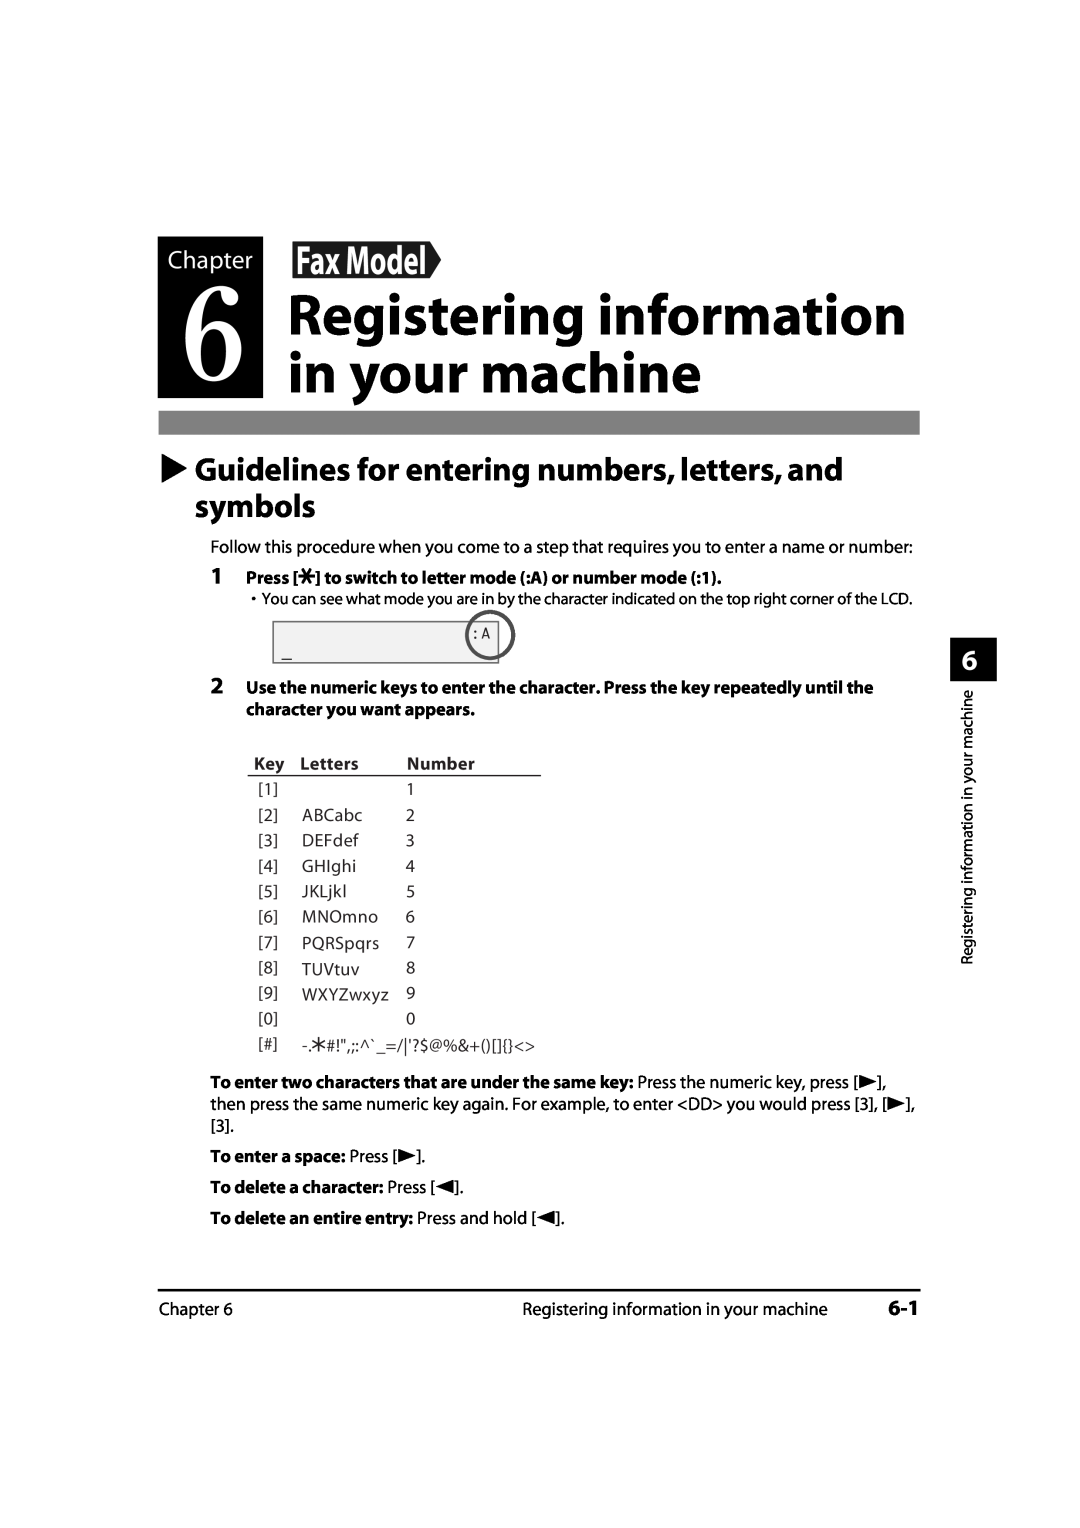 Canon MP700, 730i Guidelines for entering numbers, letters, and symbols, Registering information in your machine, Chapter 